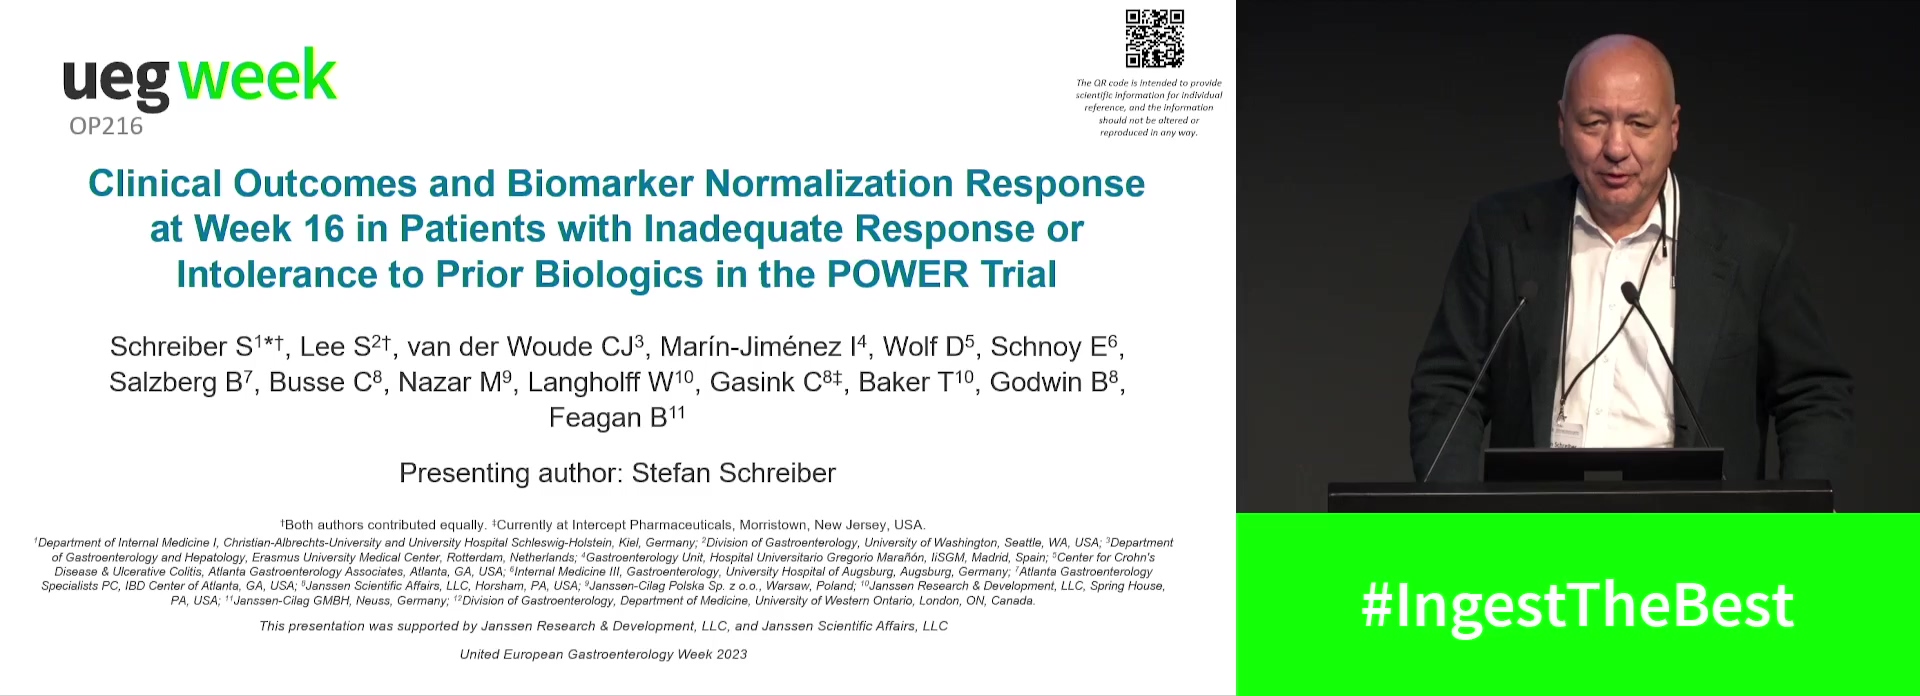 CLINICAL OUTCOMES AND BIOMARKER NORMALISATION RESPONSE AT WEEK 16 IN PATIENTS WITH INADEQUATE RESPONSE OR INTOLERANCE TO PRIOR BIOLOGICS IN THE POWER TRIAL